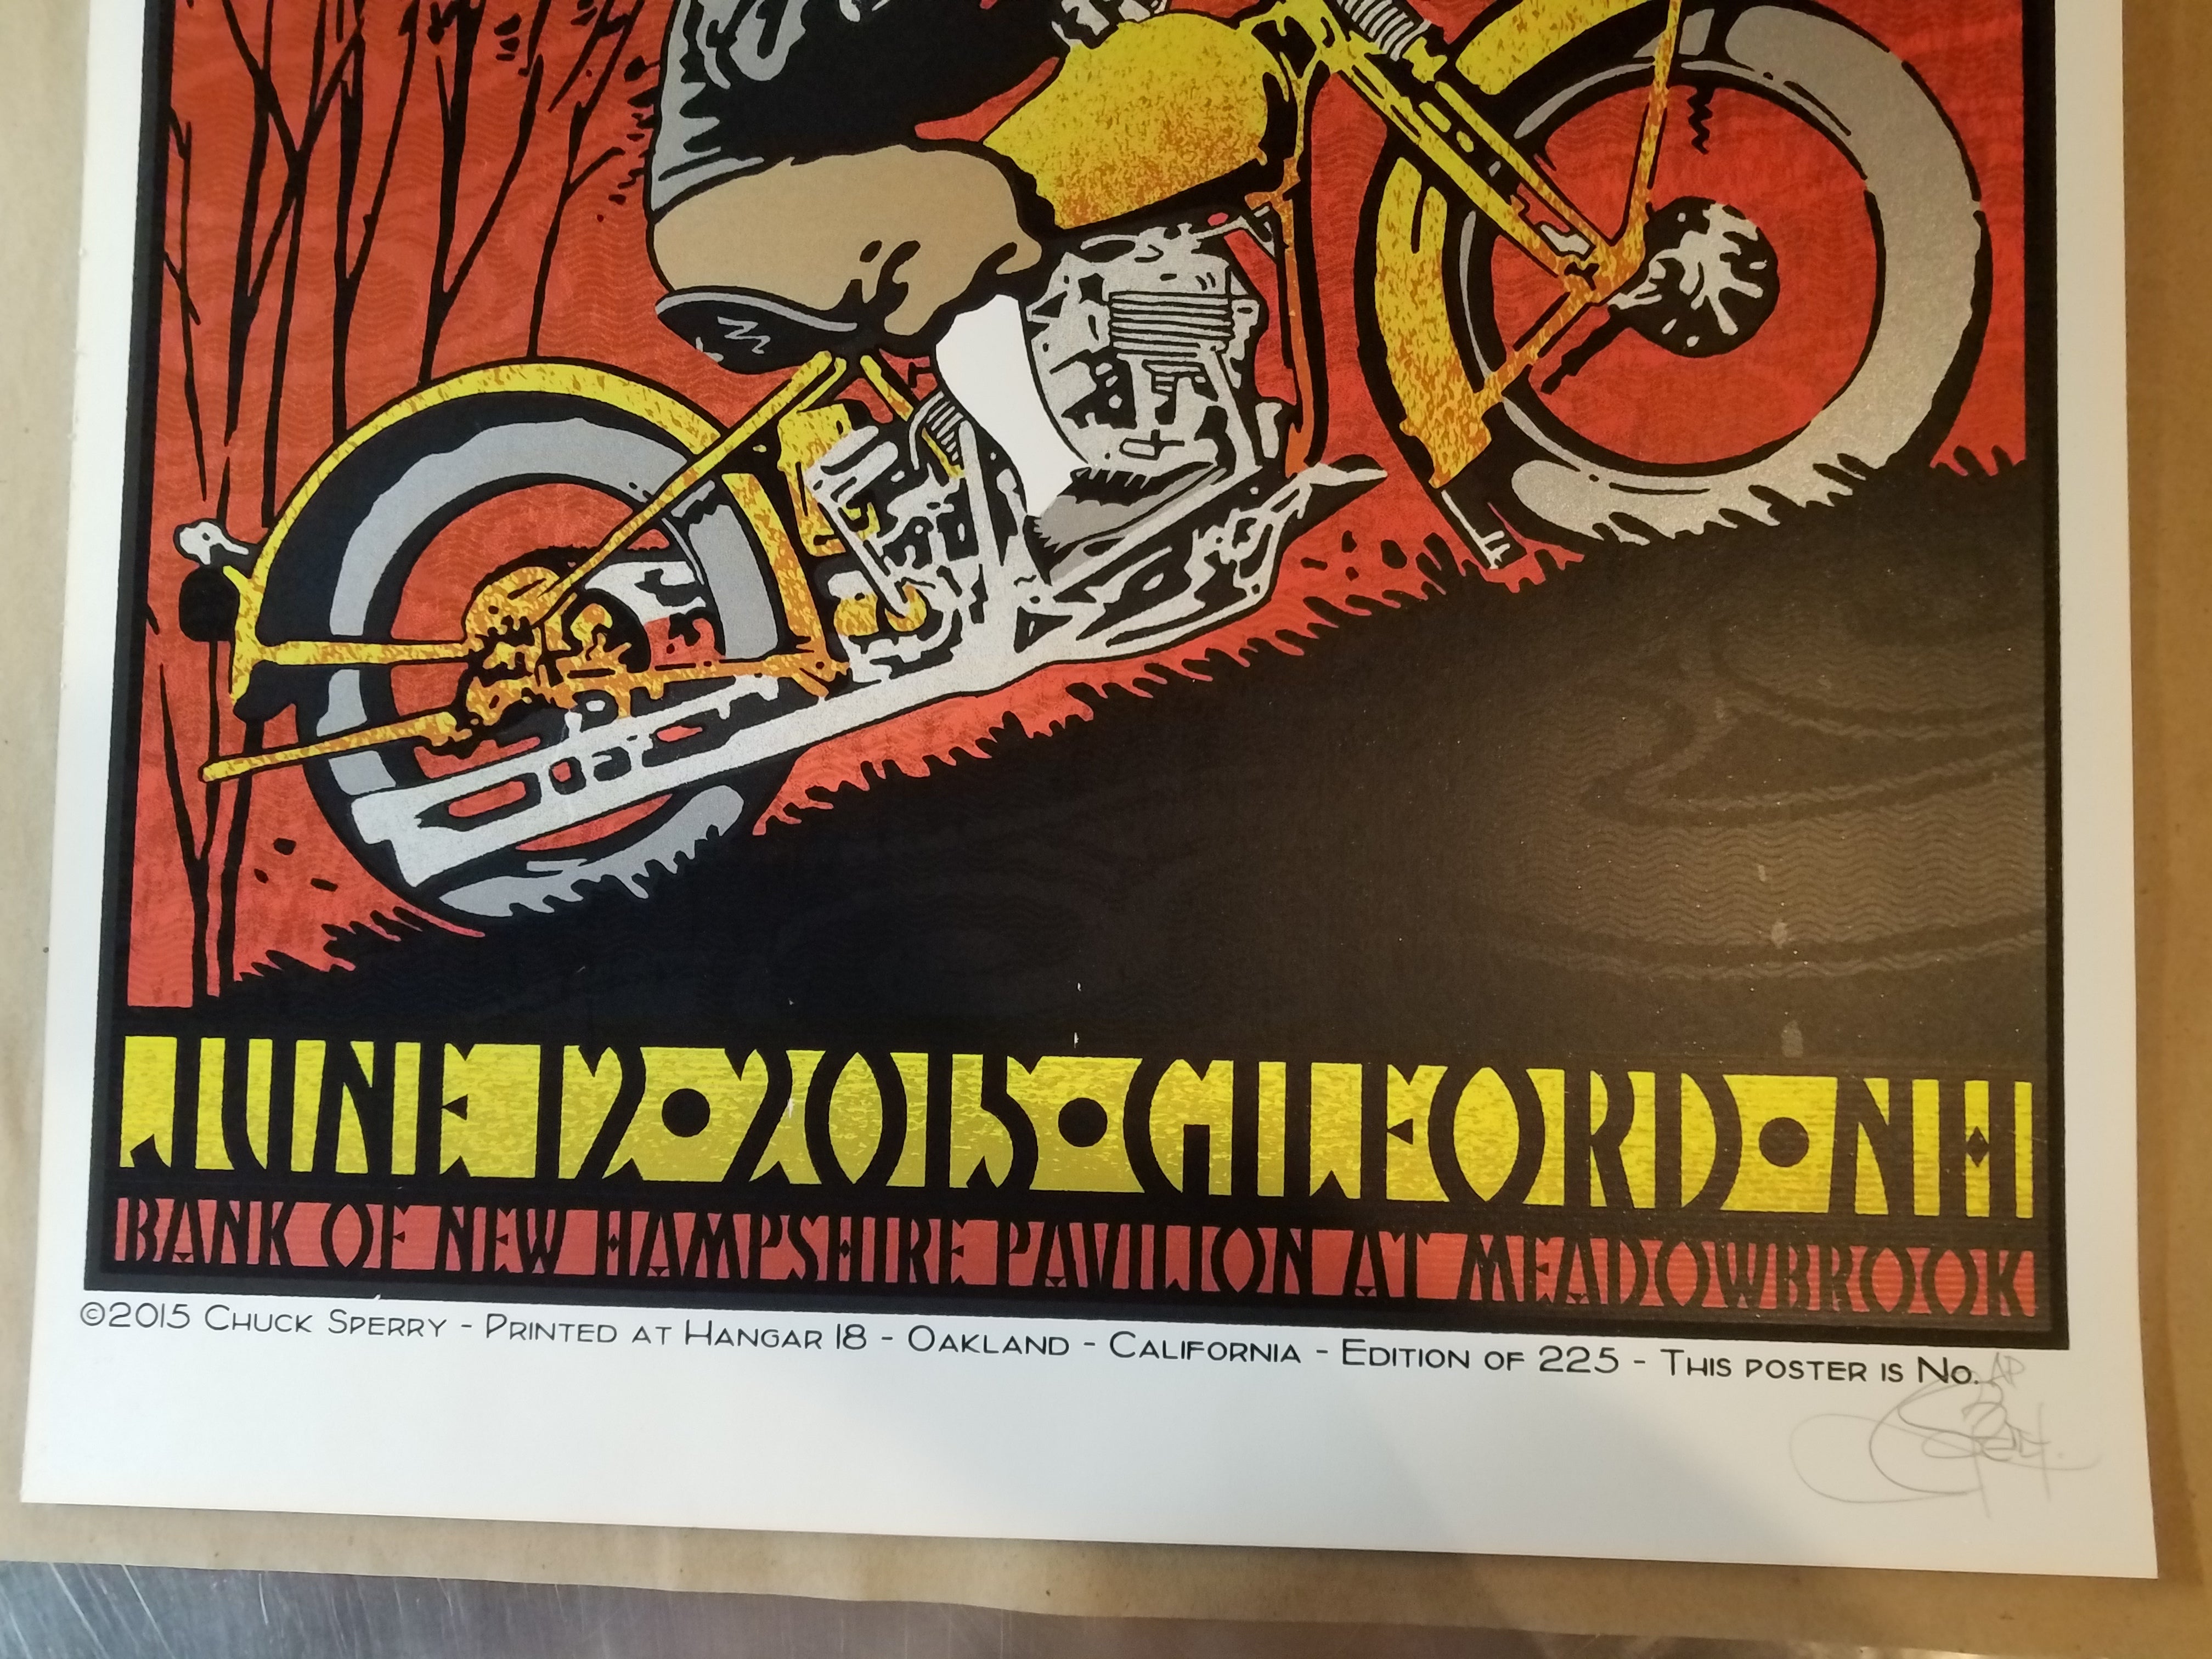 The Avett Brothers – Gilford, NH 2015 Limited Edition of 225, Signed and Numbered by the artist, Chuck Sperry Bank of New Hampshire Pavilion At Meadowbrook. 6-color Screen Print. Ready To Ship!